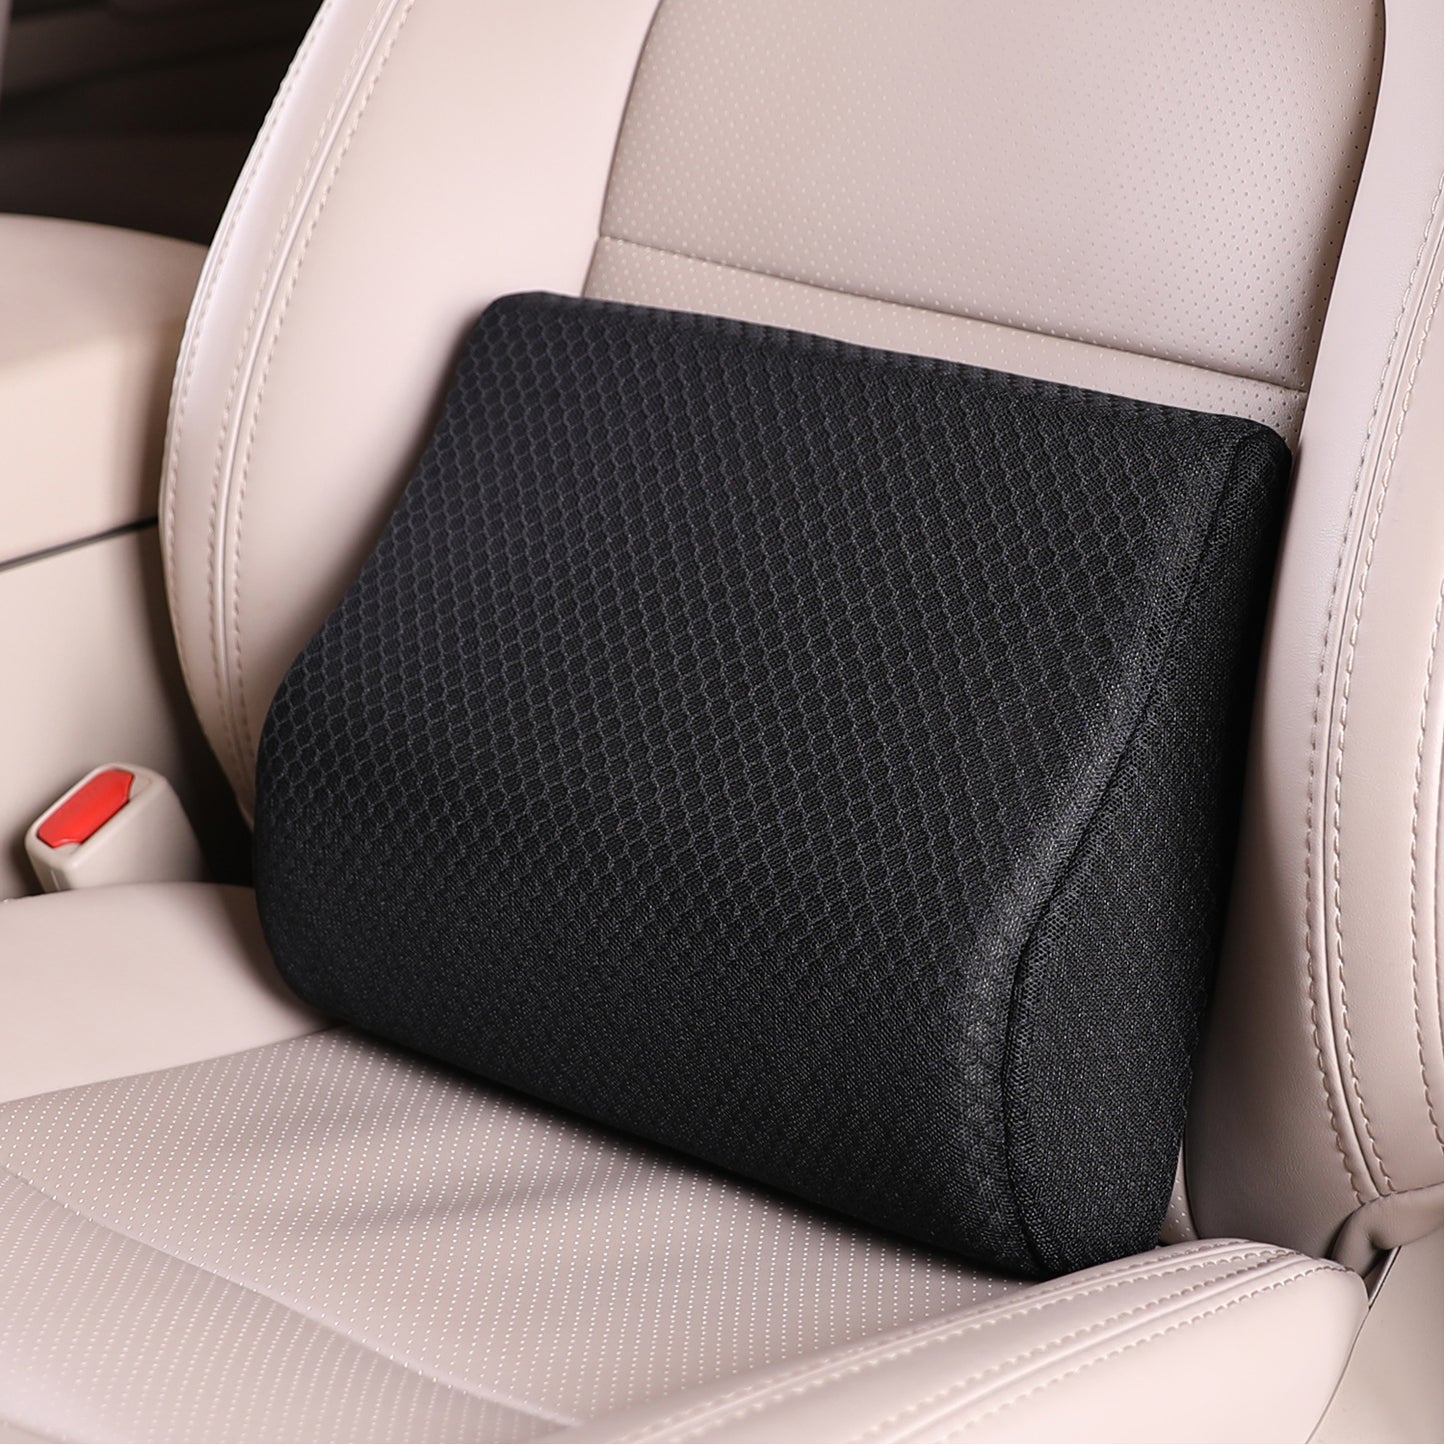 HomDSim PU Soft Leather Lumbar Cushion,Car Seat Lower Back Support Pillow  with Soft Memory Foam,Comfortable for Car Driving & Home Office Computer